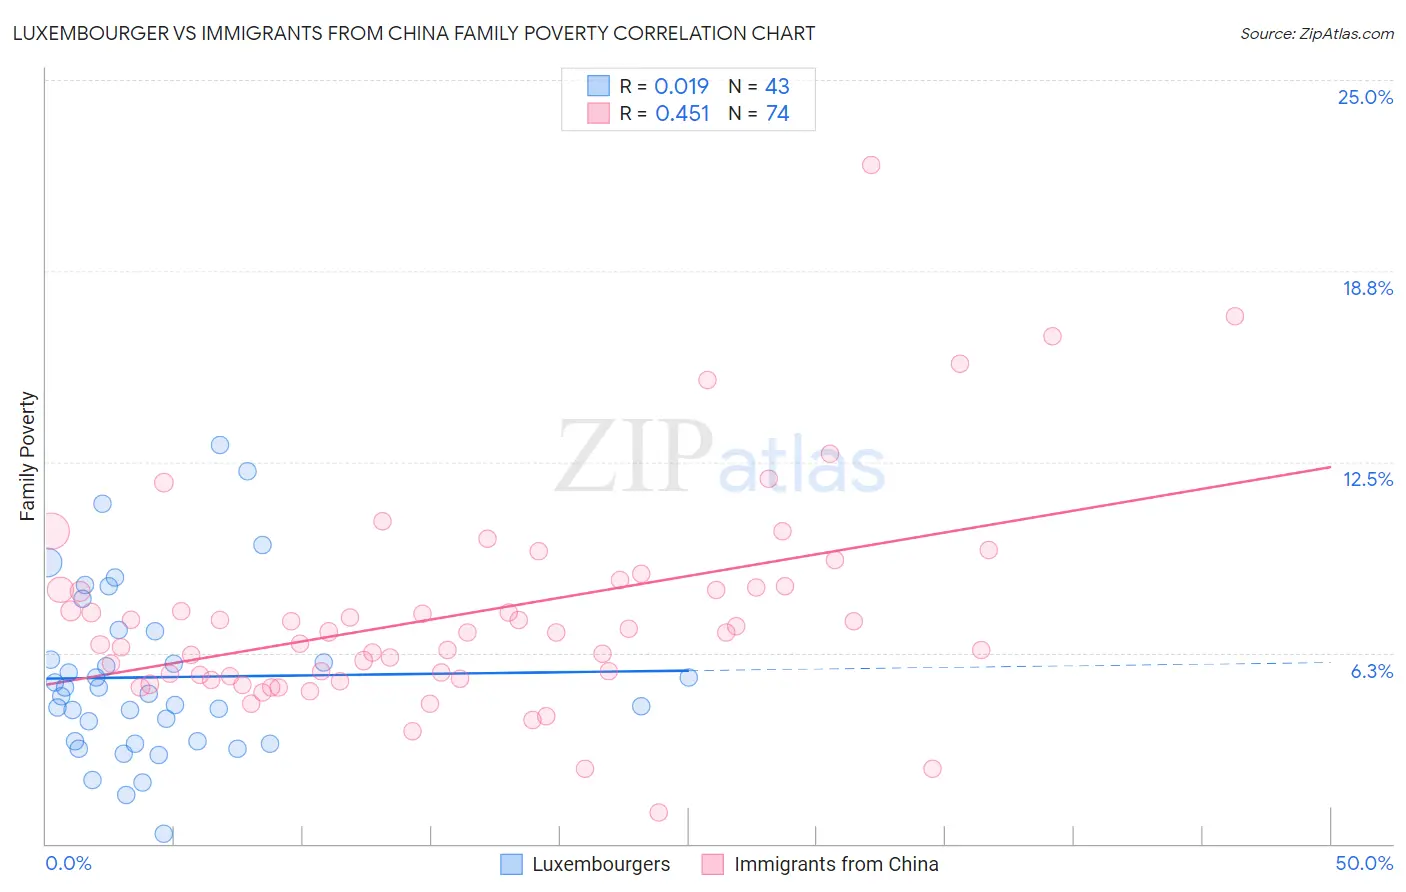 Luxembourger vs Immigrants from China Family Poverty